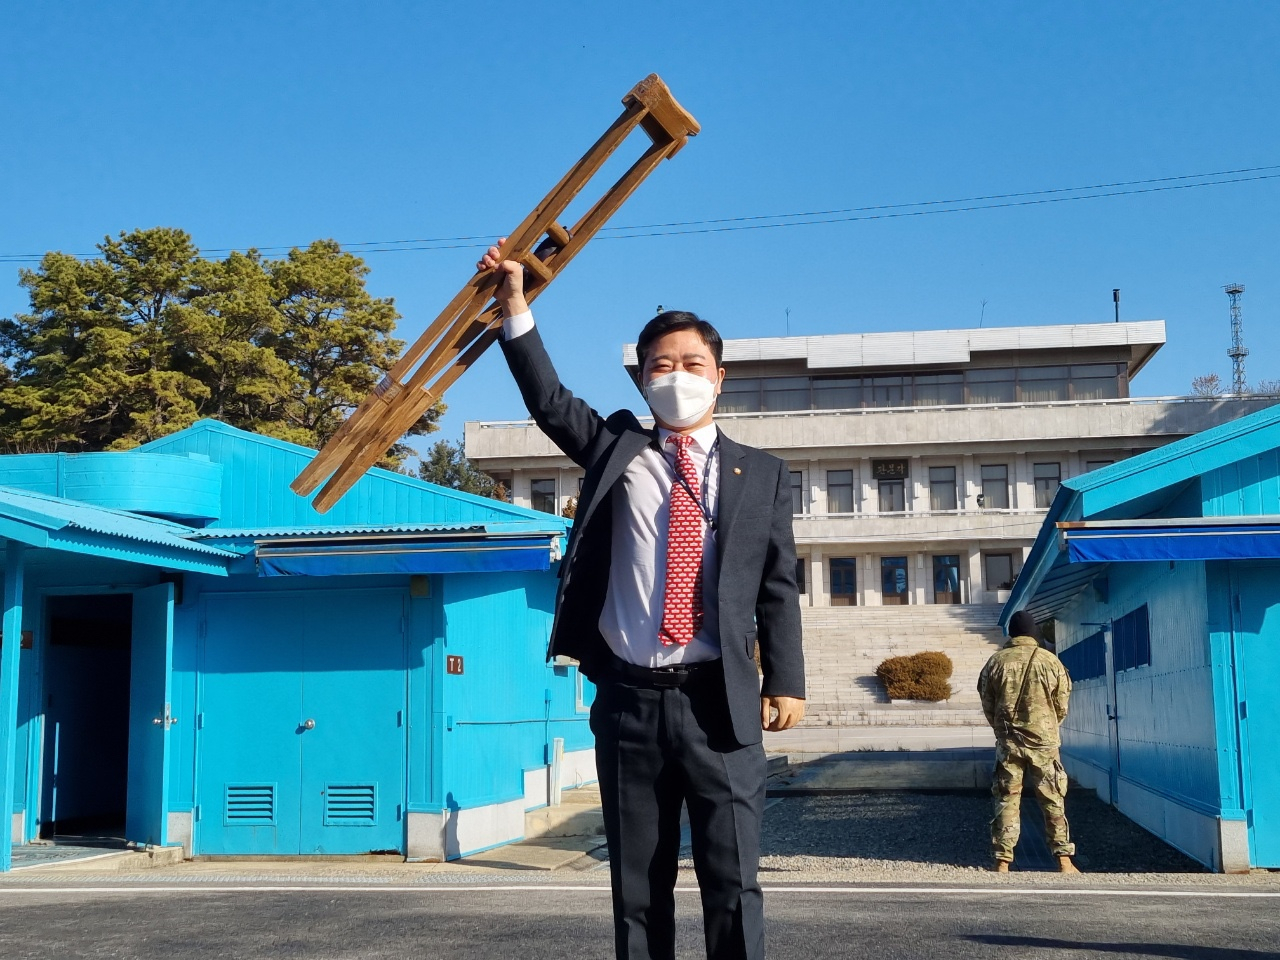 Defector-turned-lawmaker Rep. Ji Seong-ho hoists the crutches he depended on throughout his journey out of North Korea at the Panmunjom border village, on Dec. 22, 2021. (Courtesy of Ji)